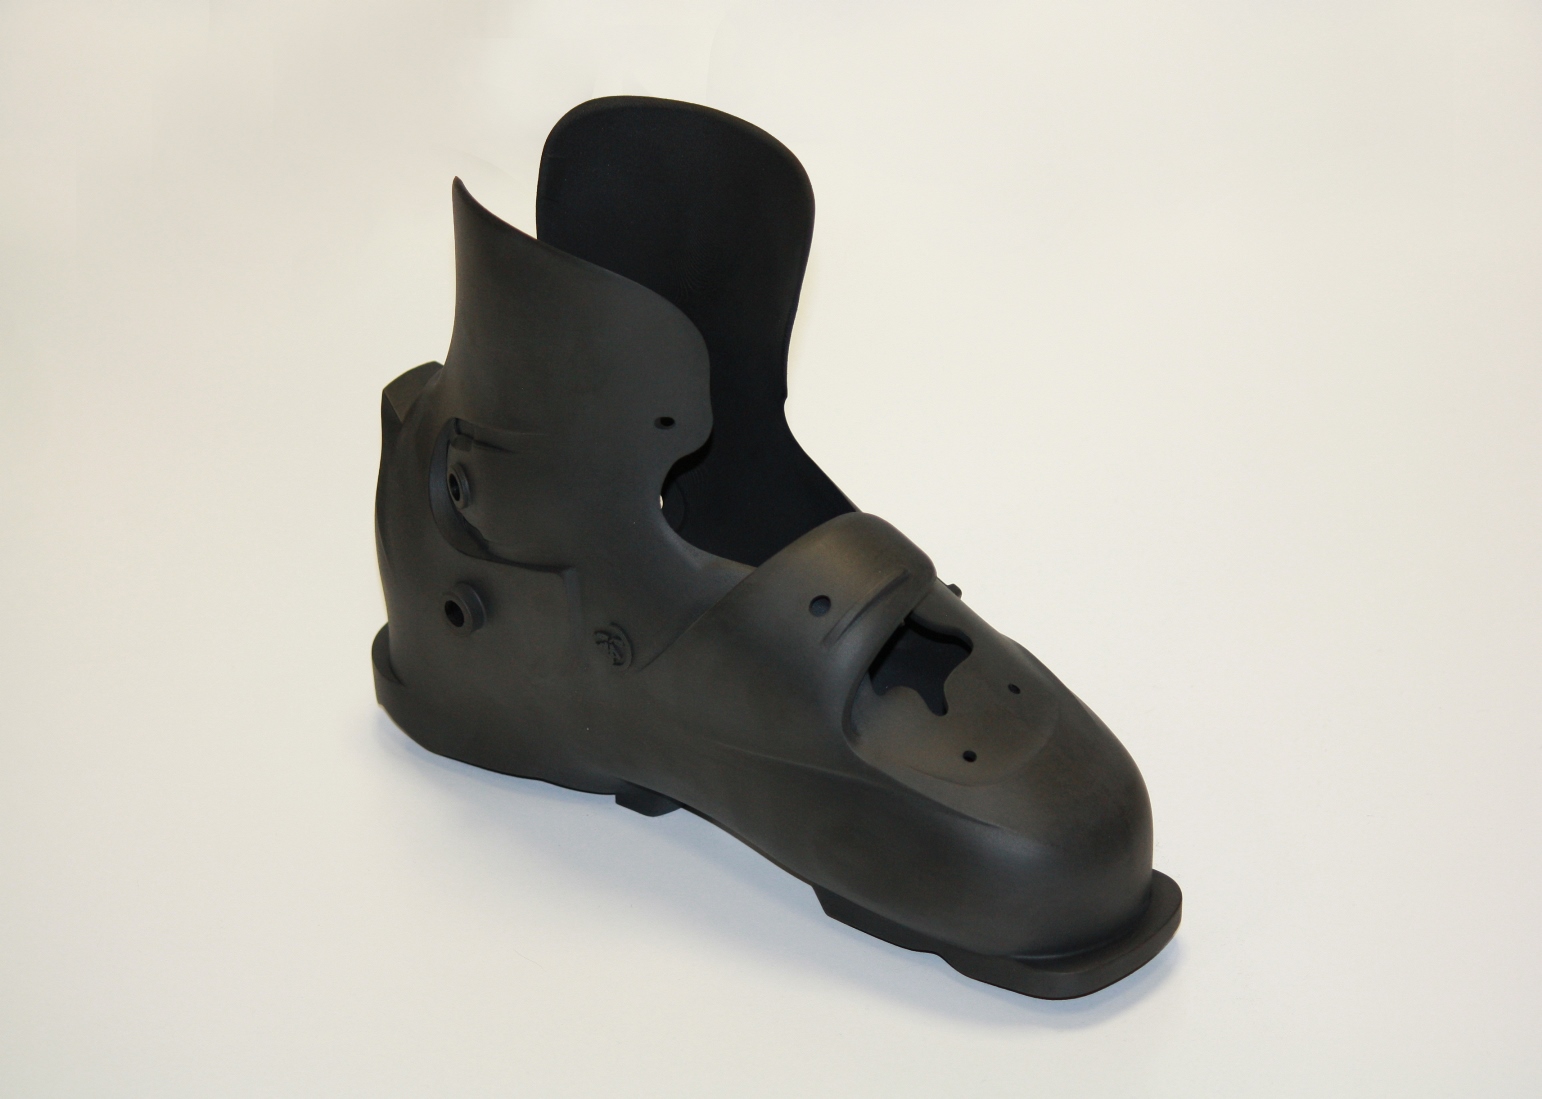 A skiboot made from Windform 3D printing material.